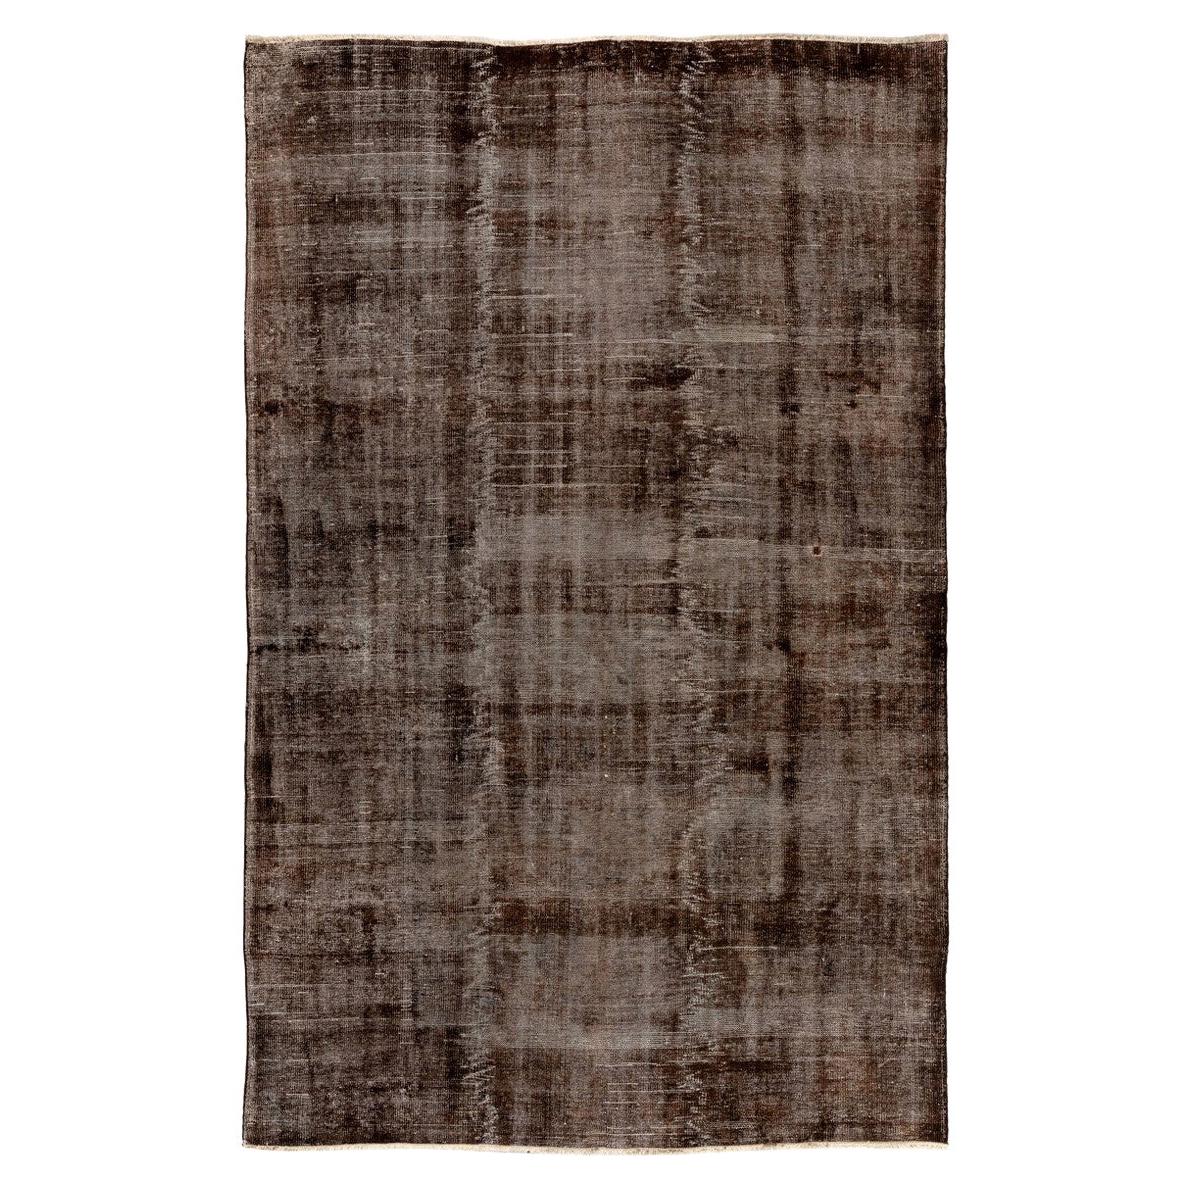 6.8x10.2 Ft Distressed Mid-20th Century Handmade Anatolian Rug Re-Dyed in Brown For Sale